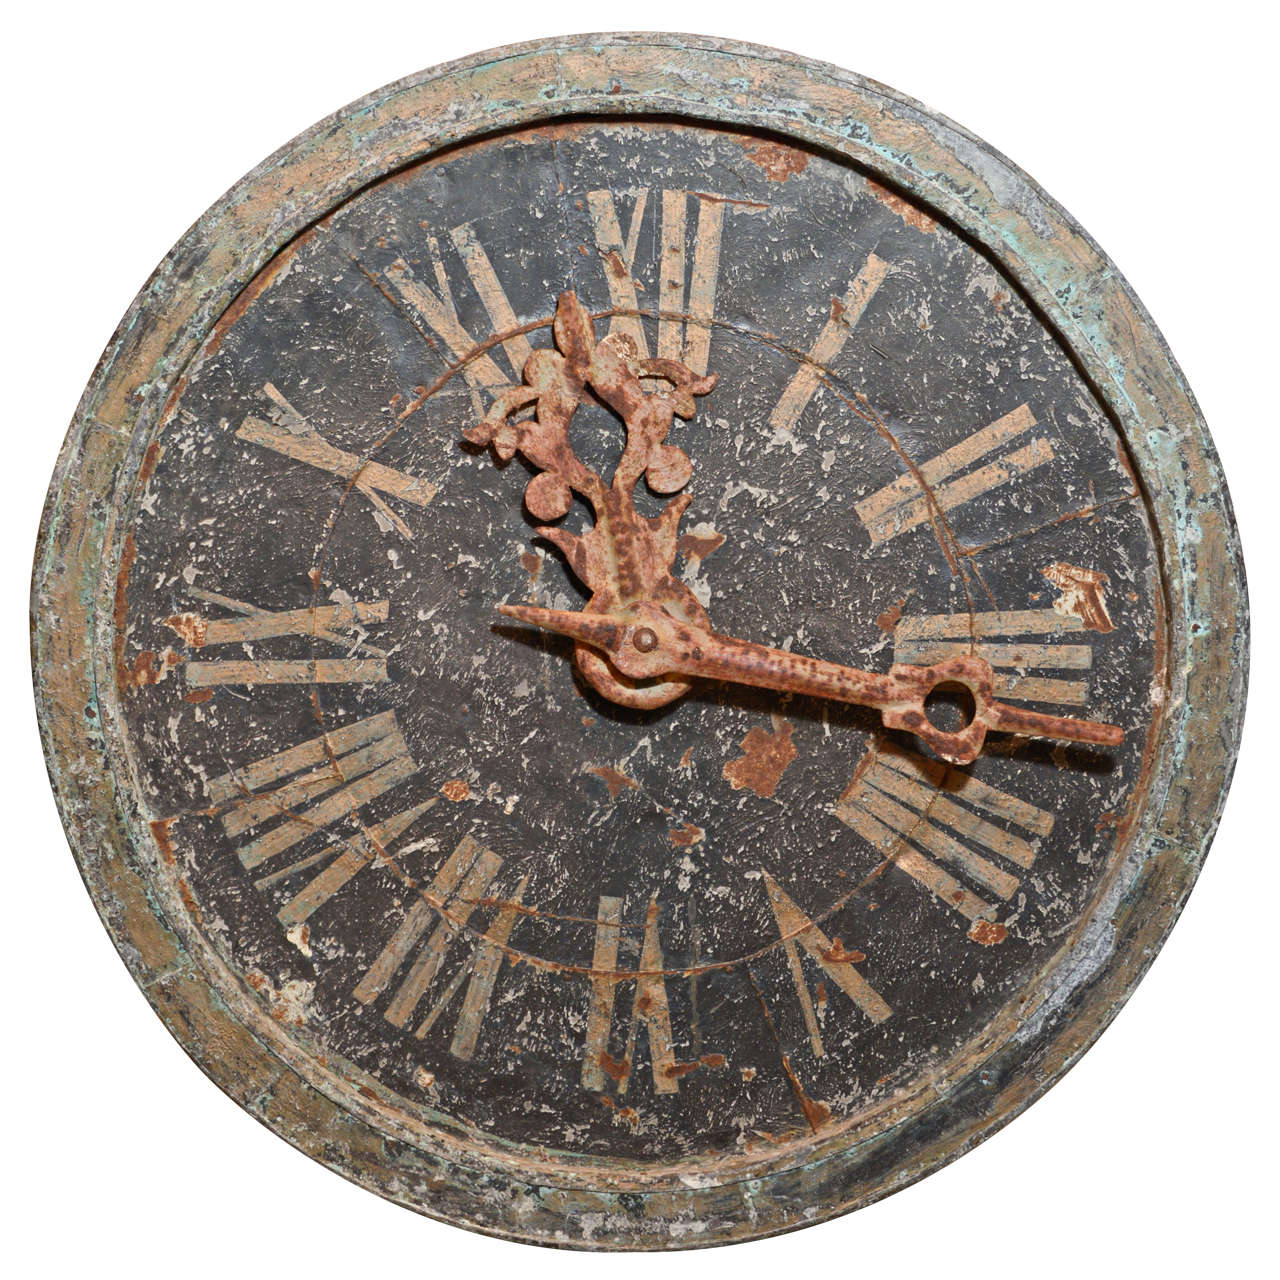 19th C. Authentic Clock Face and Hands